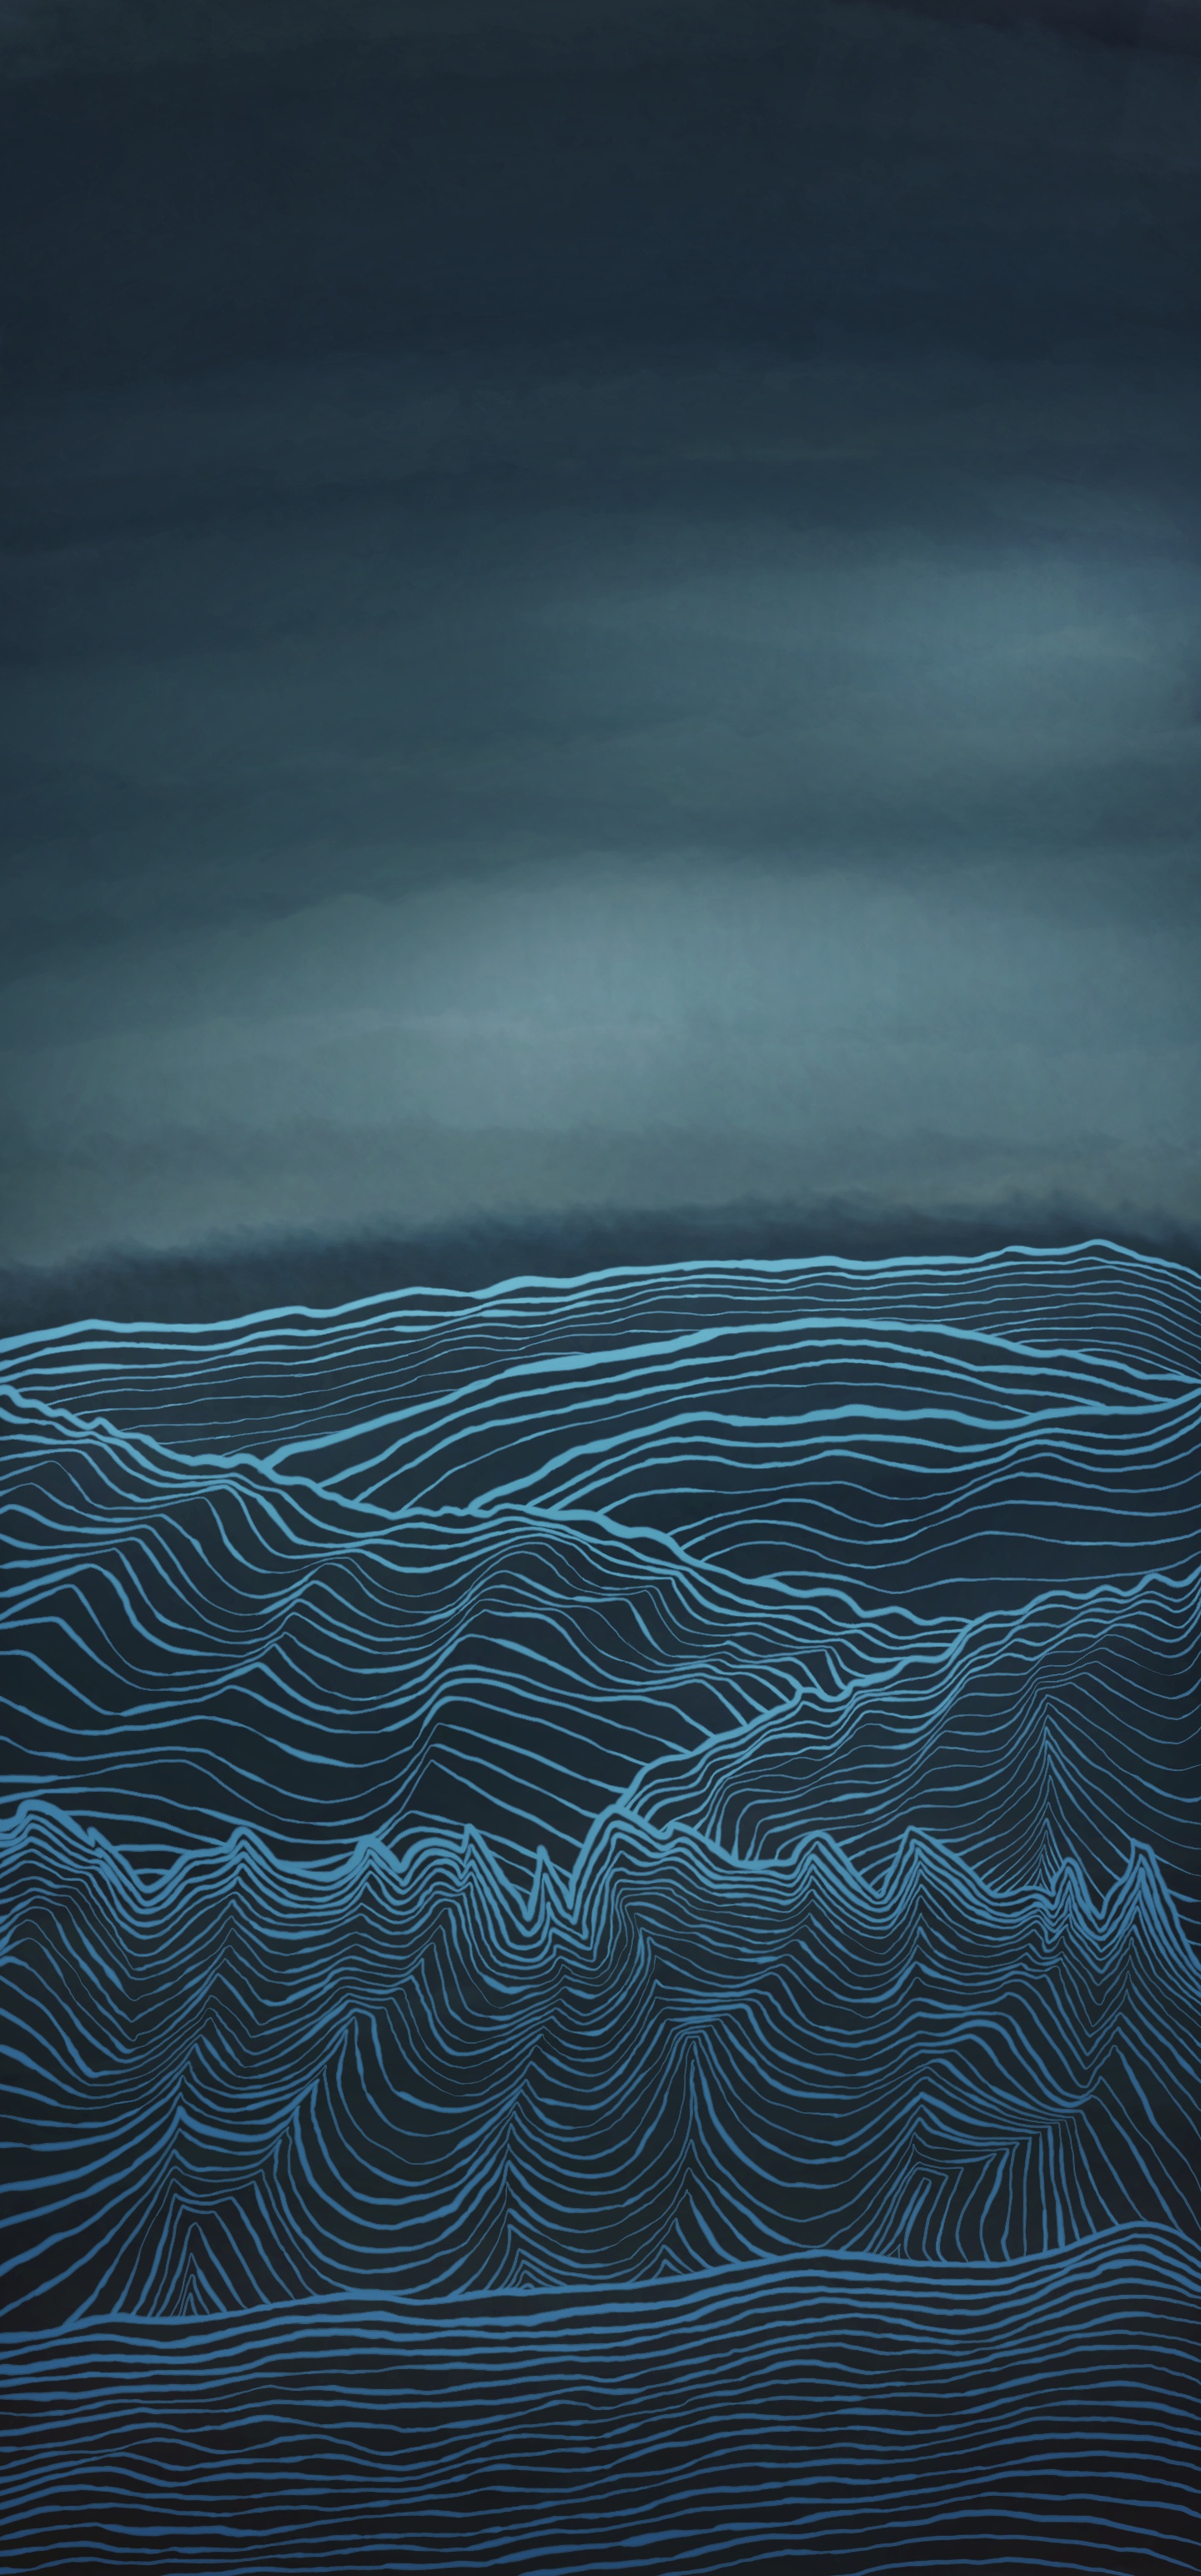 Portrait Display Blue Abstract Vertical Waves Water 1440x3088